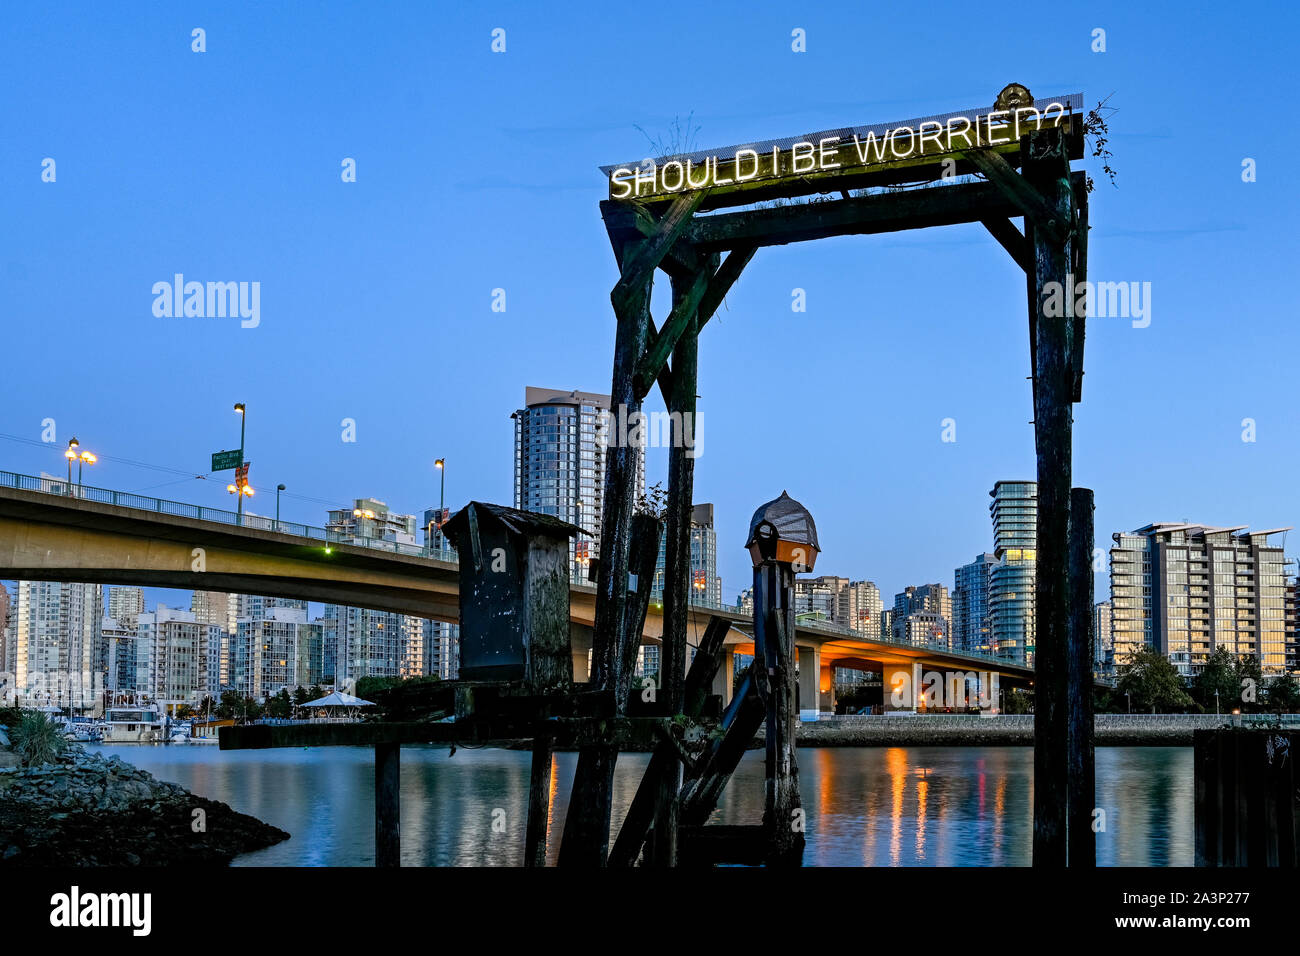 Public art installation by artist Justin Langlois, False Creek, Vancouver, British Columbia, Canada Stock Photo